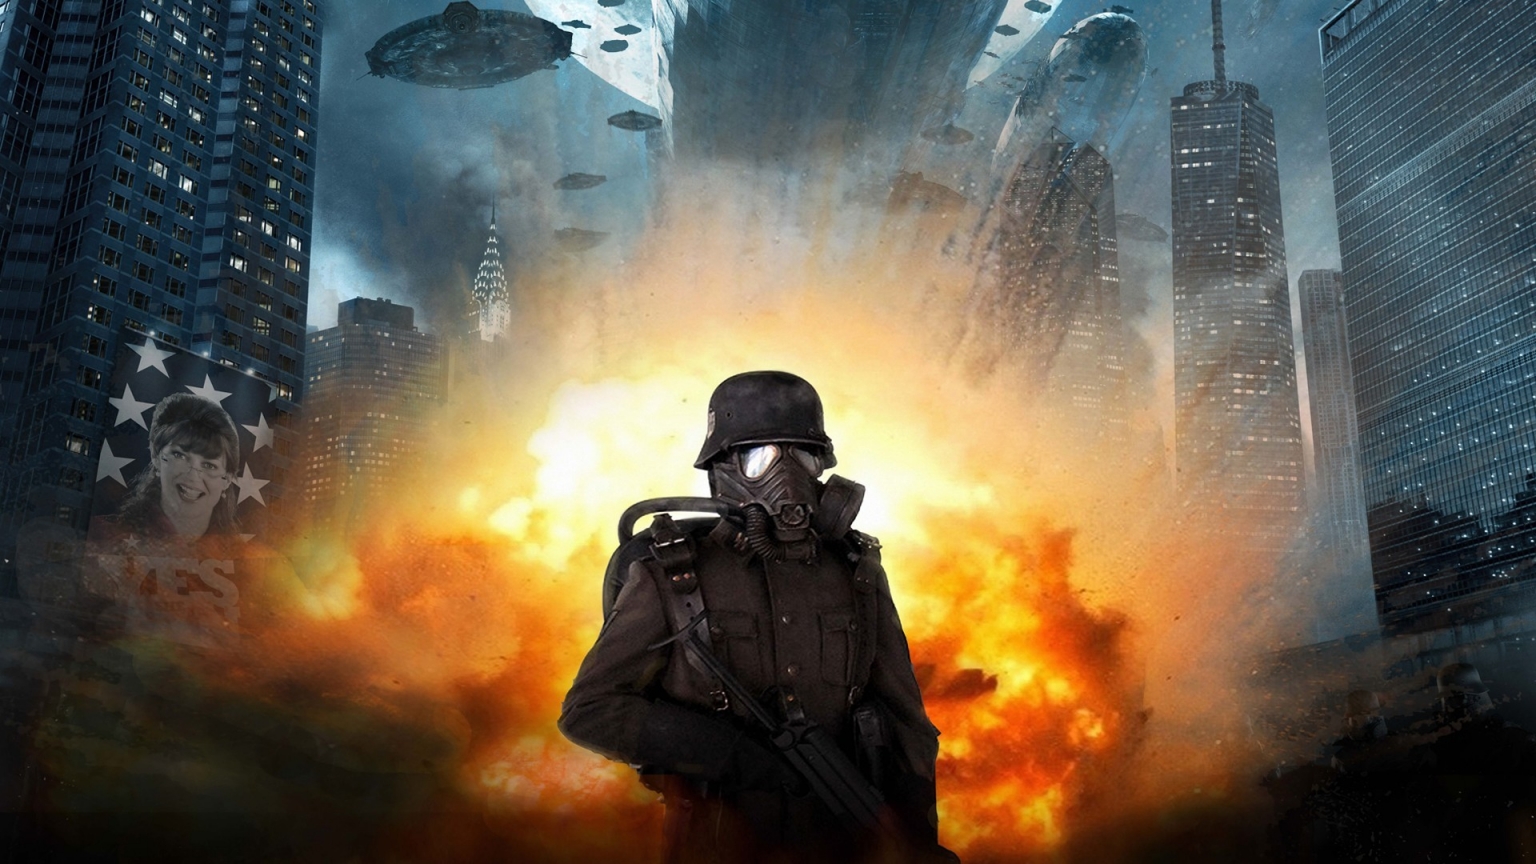 Iron Sky Soldier for 1536 x 864 HDTV resolution